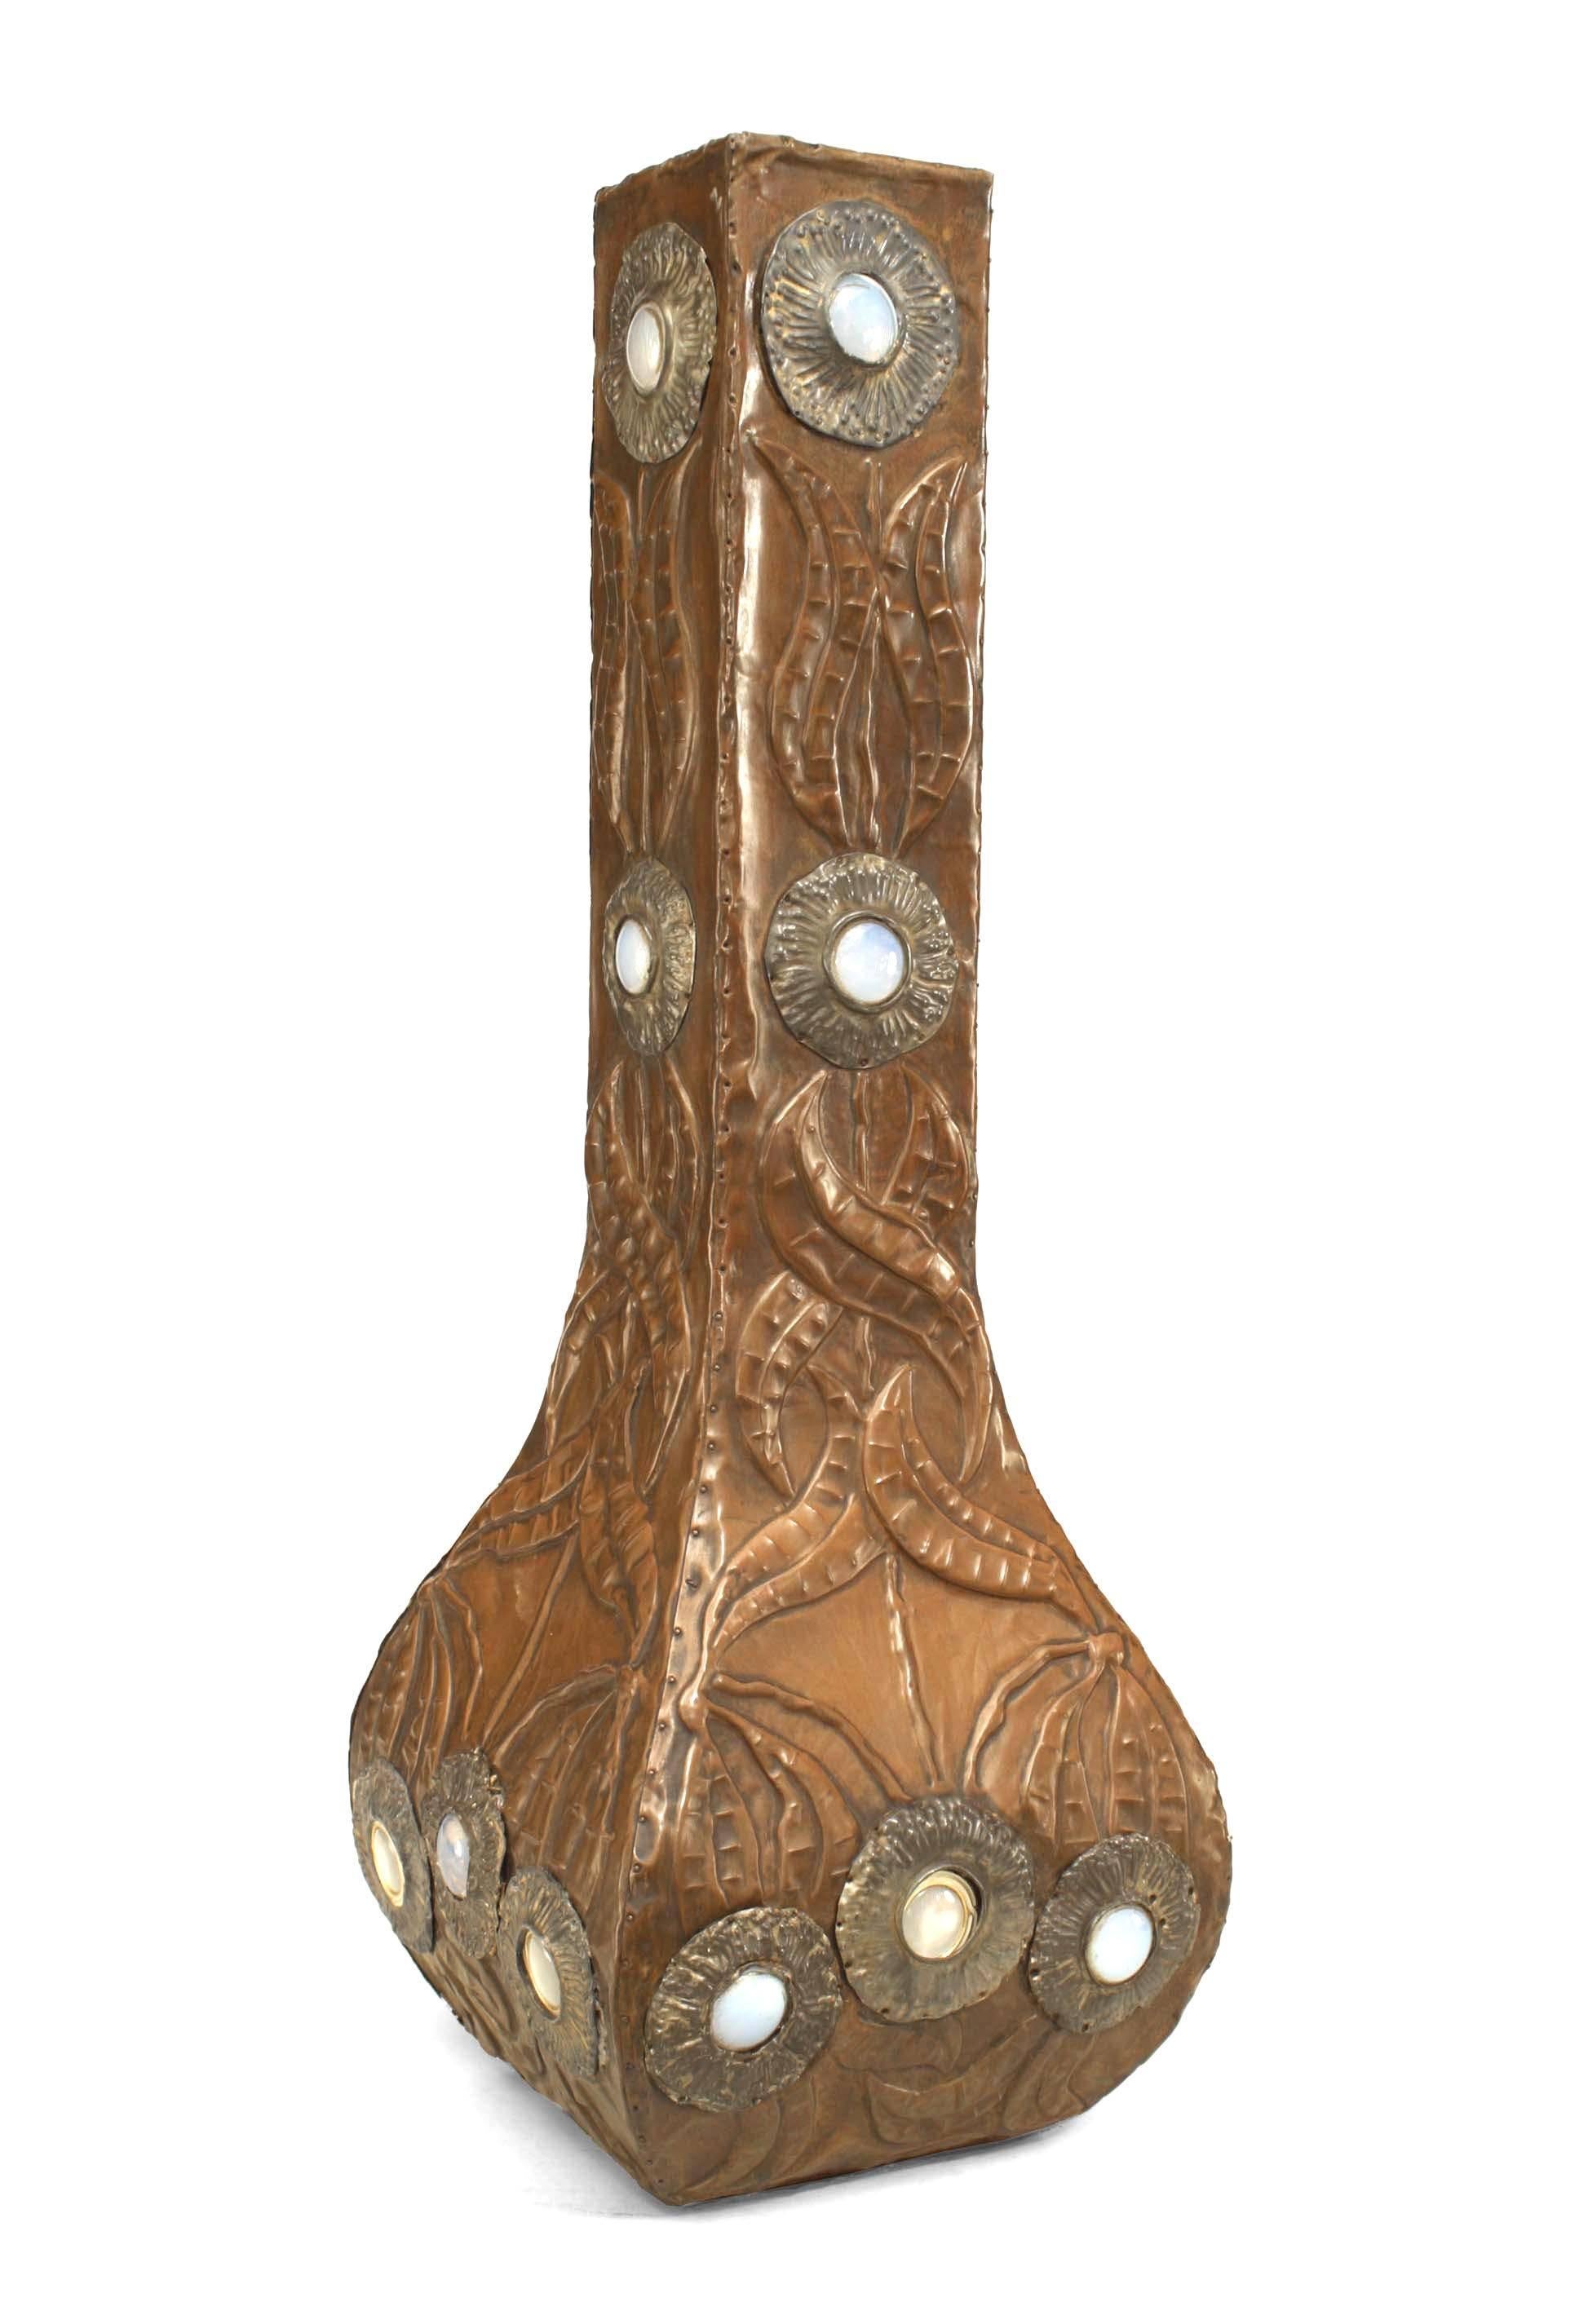 Art Nouveau copper veneered square shaped vase with tapered neck and incised floral design with opaline inserts as flowers.
